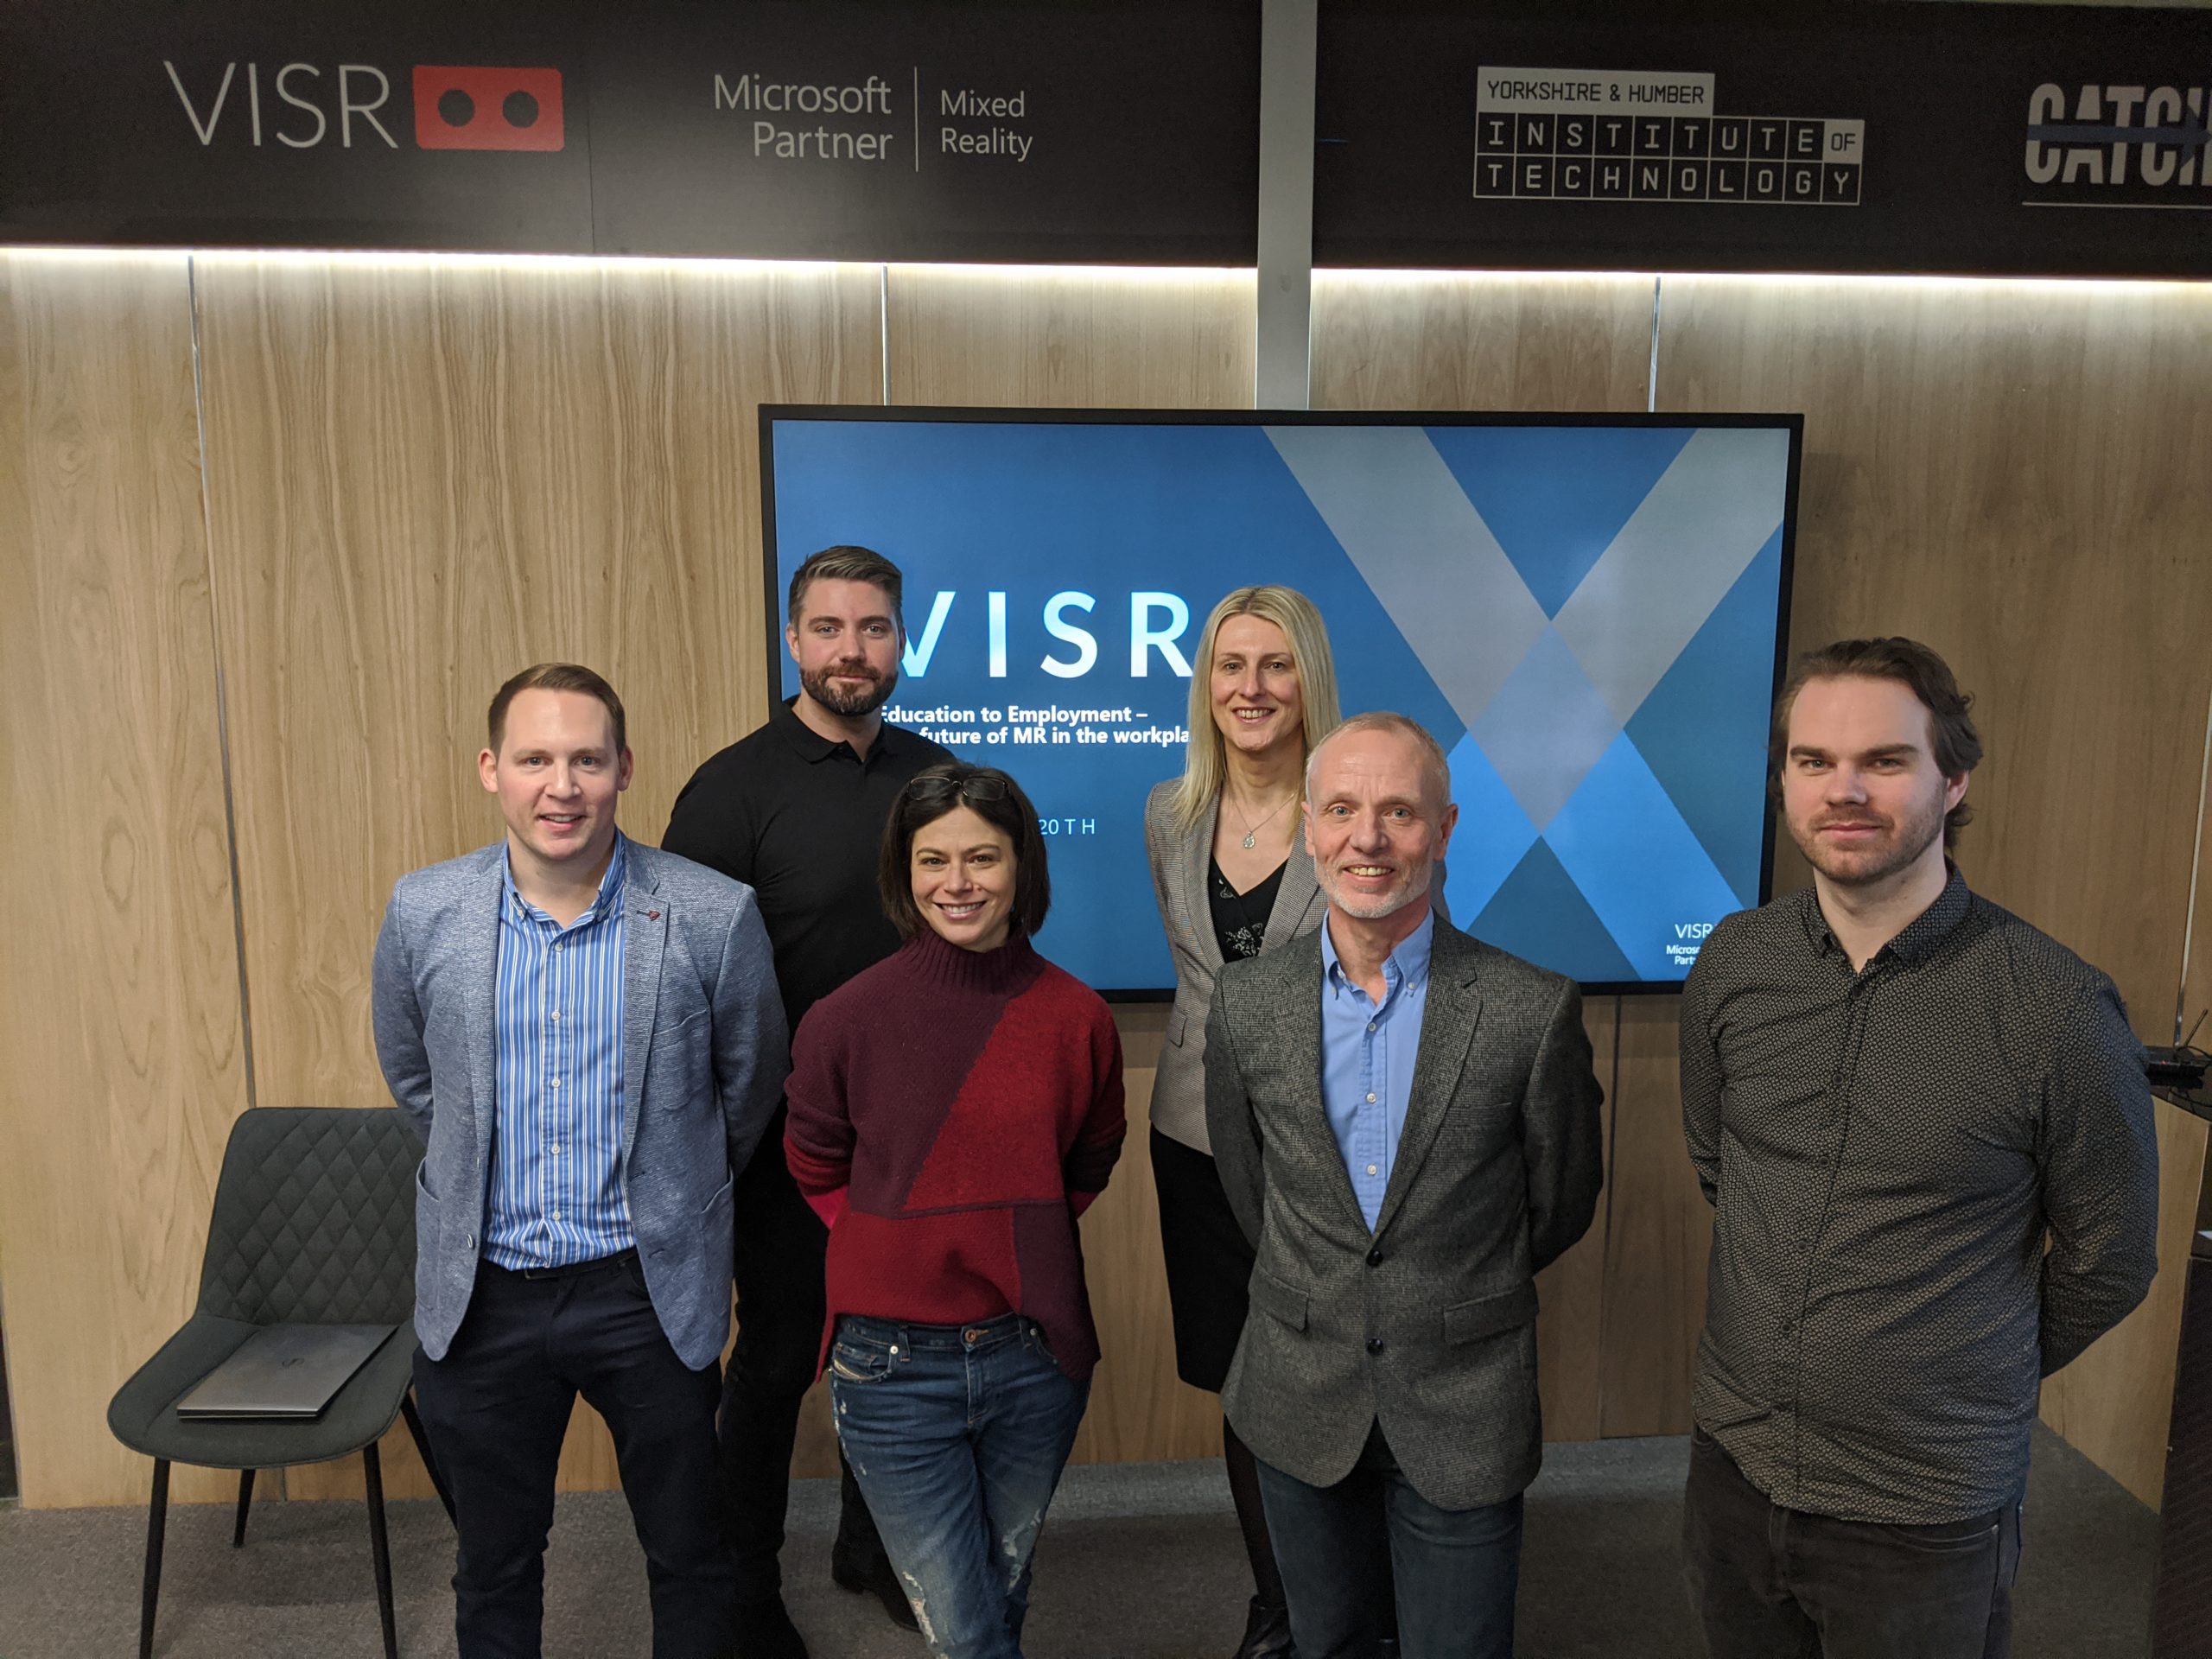 From left: Jason Lovell, from PWC; Oliver Nicol, from VISR; Leila Martine, from Microsoft; Amy Gadd, from the Yorkshire and Humber Institute of Technology; Lindsay West, from VISR, and Louise Deane, from VISR